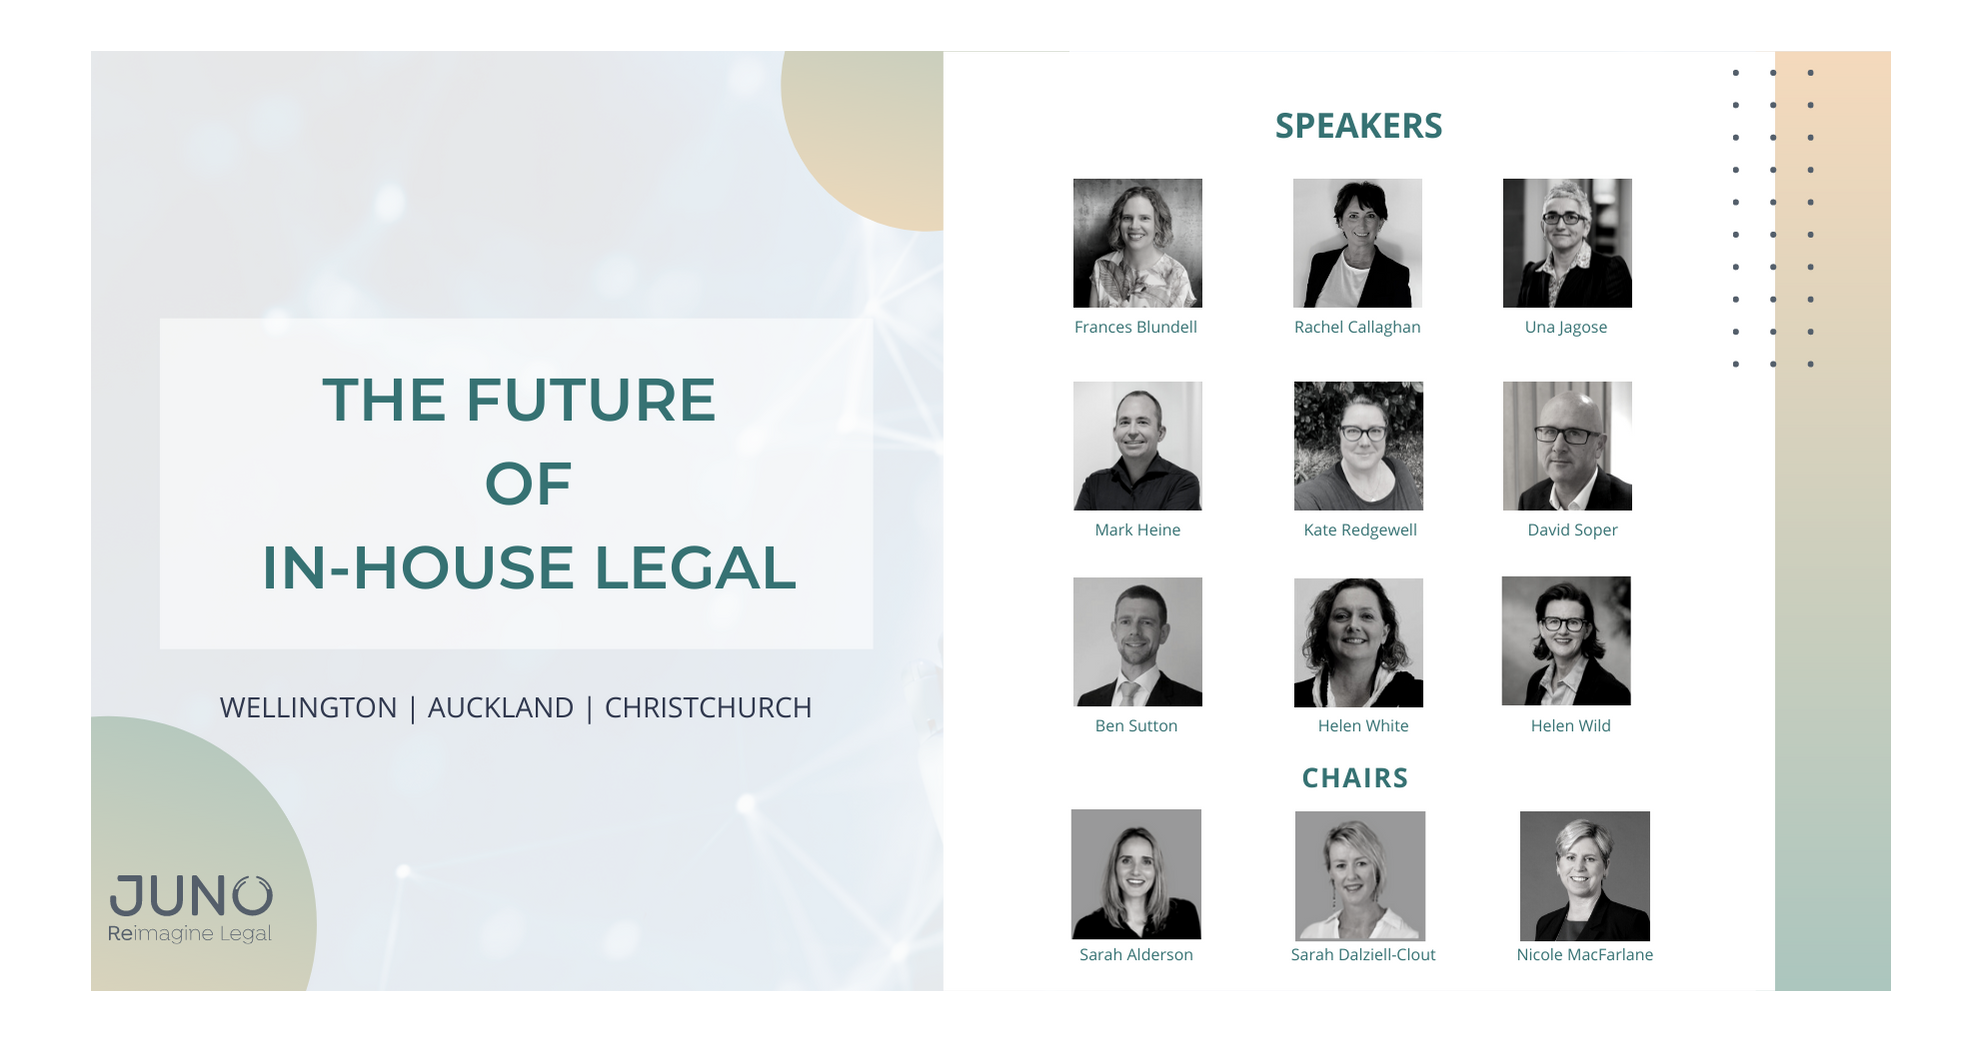 The Future of In-house Legal